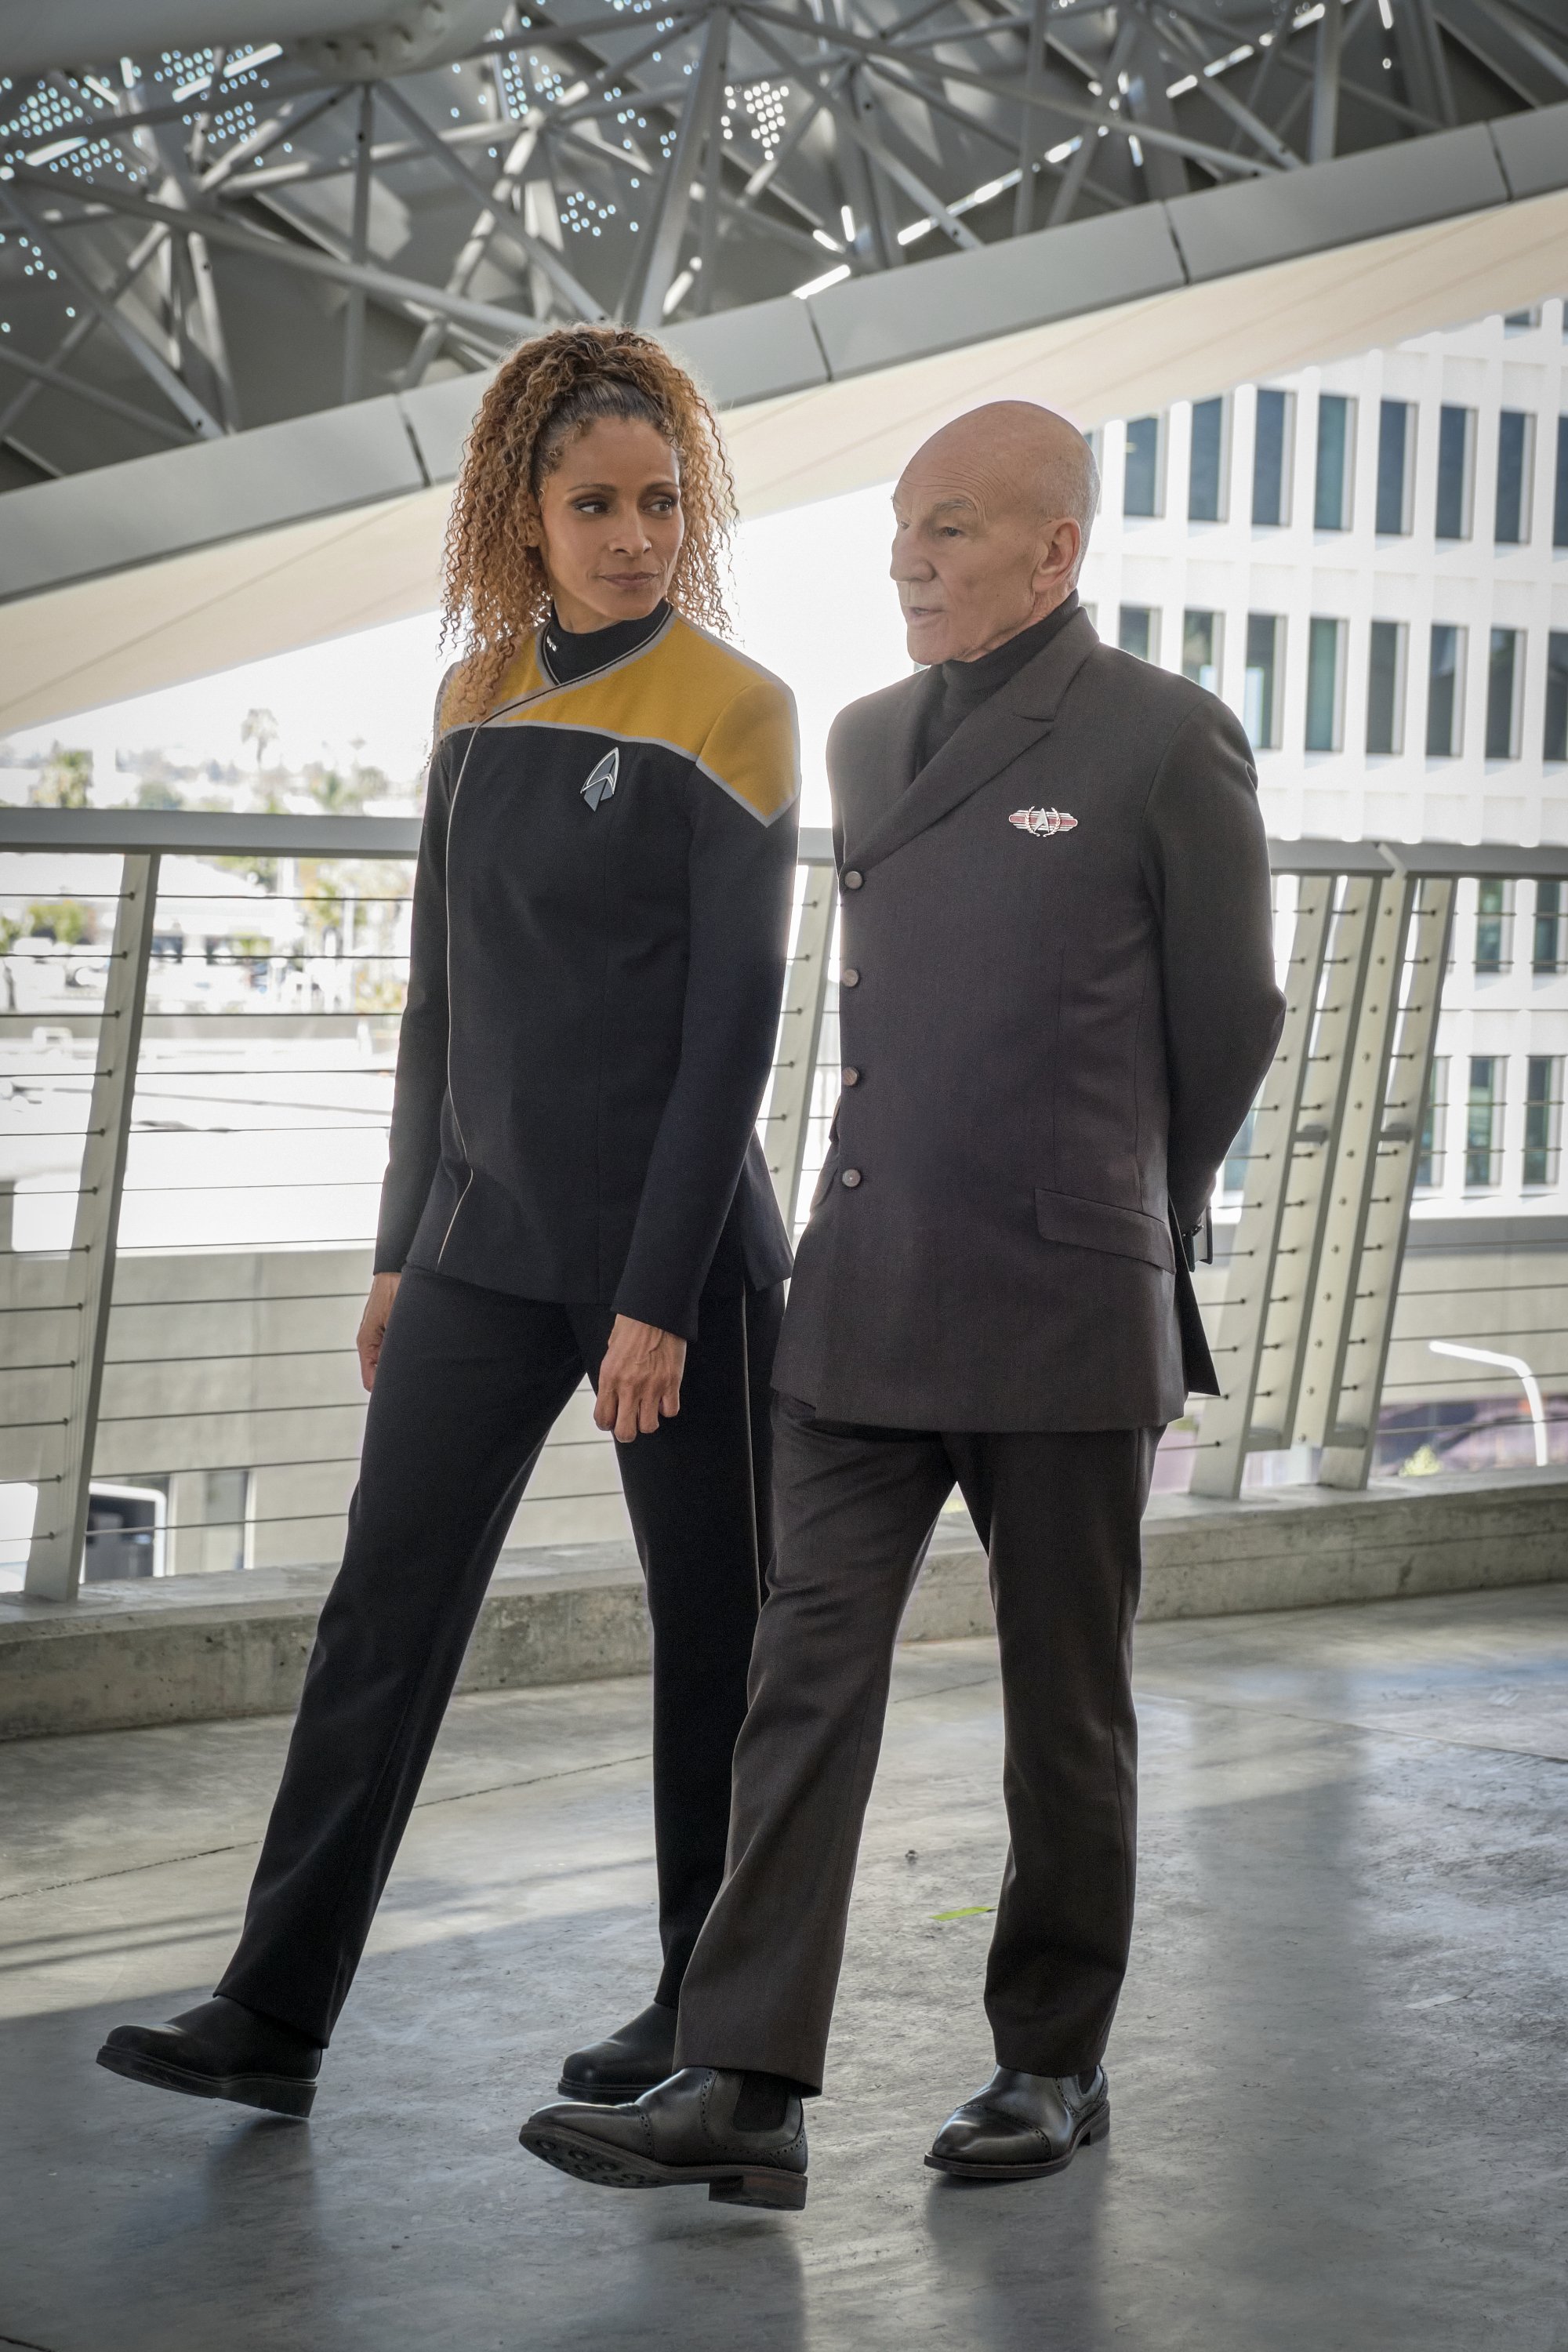   Pictured: Michelle Hurd as Raffi and Sir Patrick Stewart as Jean-Luc Picard of the Paramount+ original series STAR TREK: PICARD. Photo Cr: Trae Patton/Paramount+ (C)2022 ViacomCBS. All Rights Reserved.  